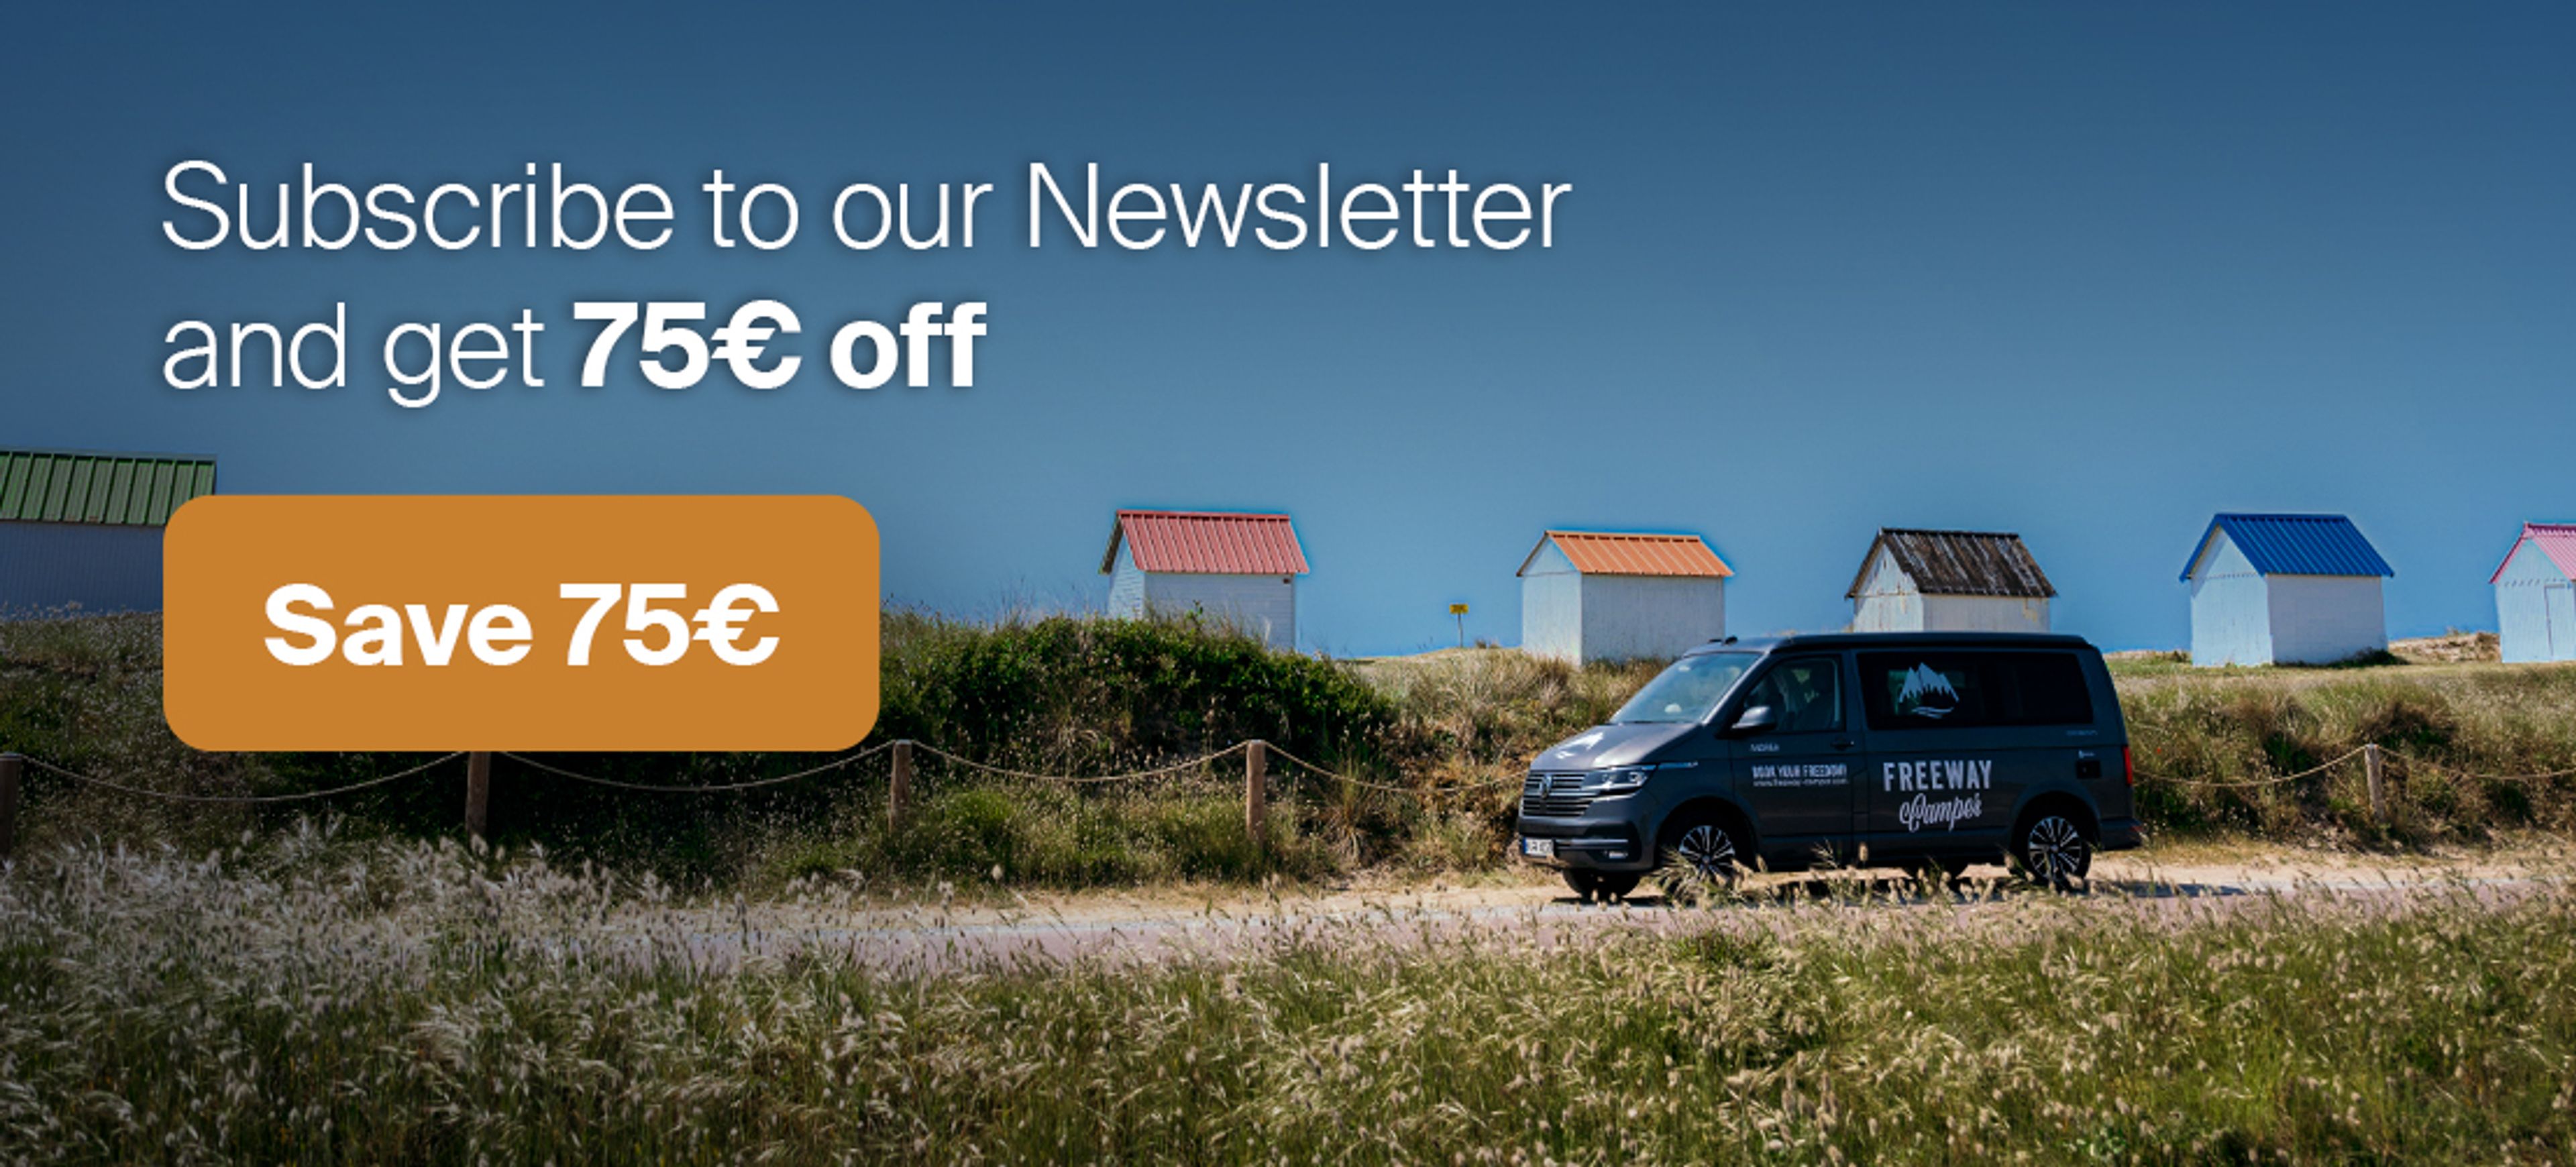 Subscribe to our newsletter and save 75€ for trips from 5 nights